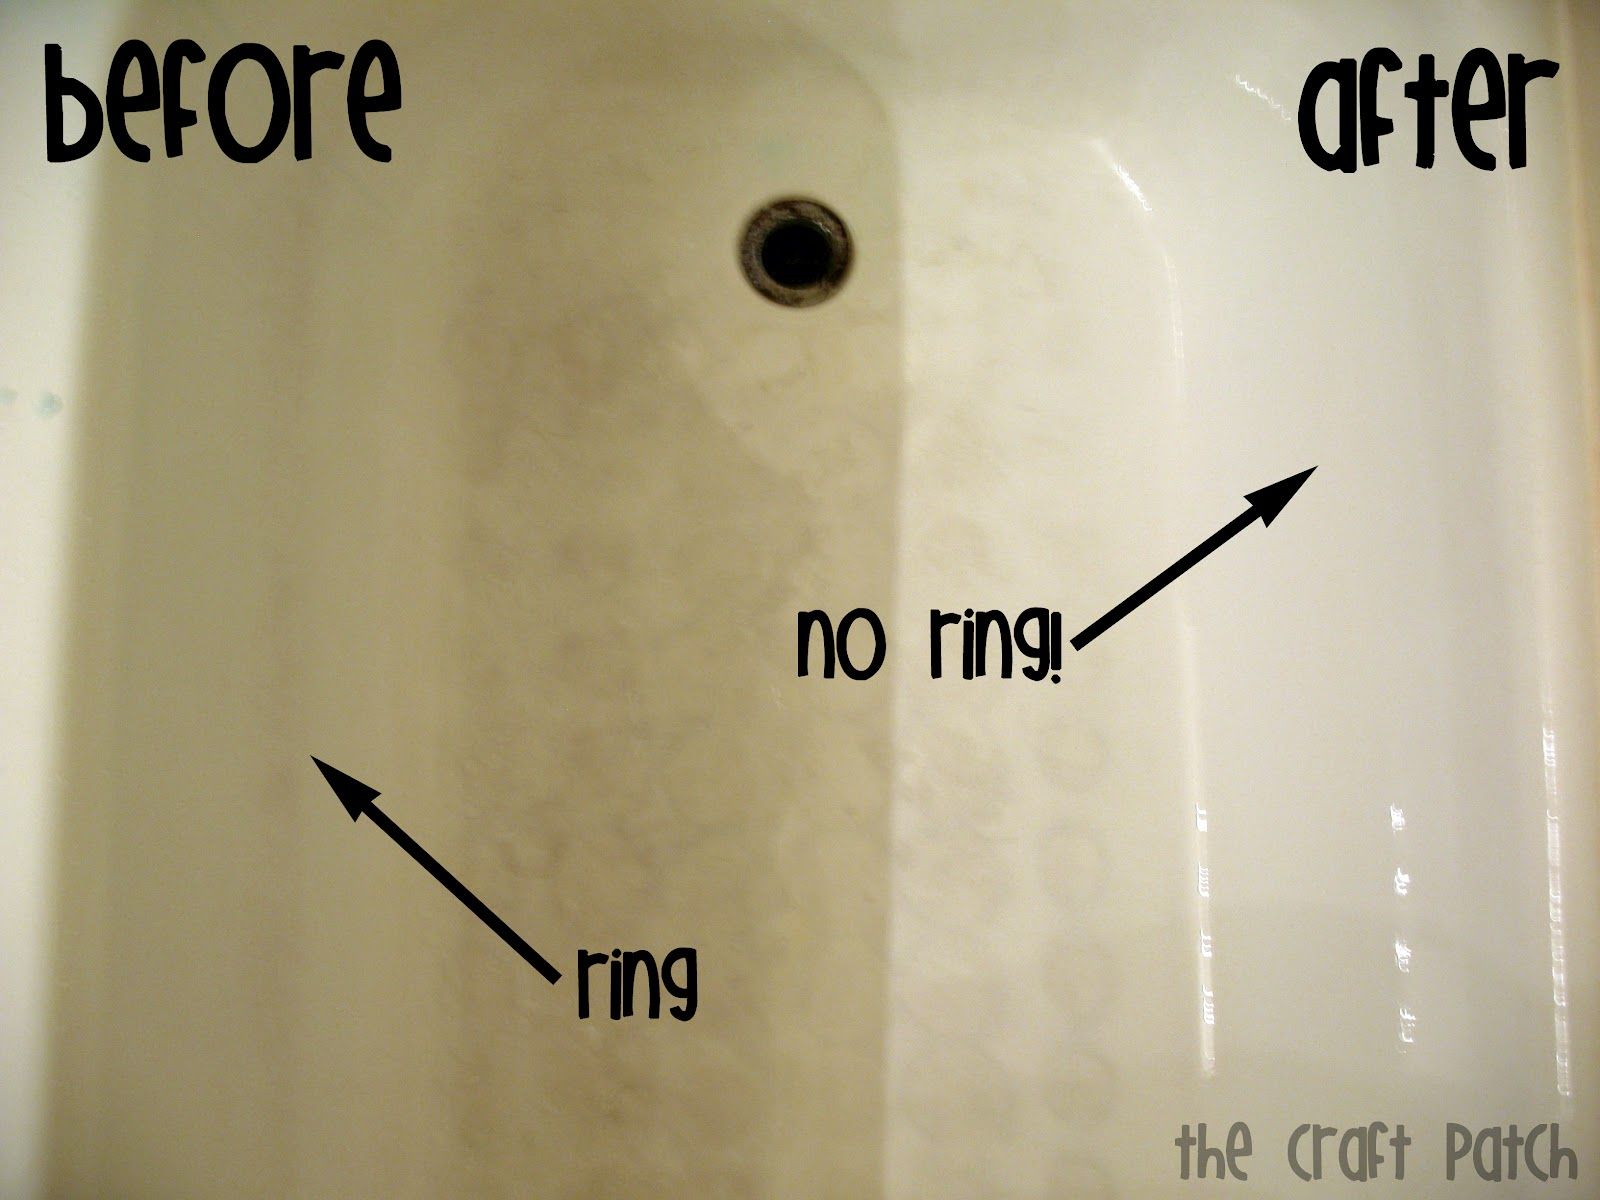 DIY bathtub cleaner — equal parts dish soap and vinegar.  The website recommend